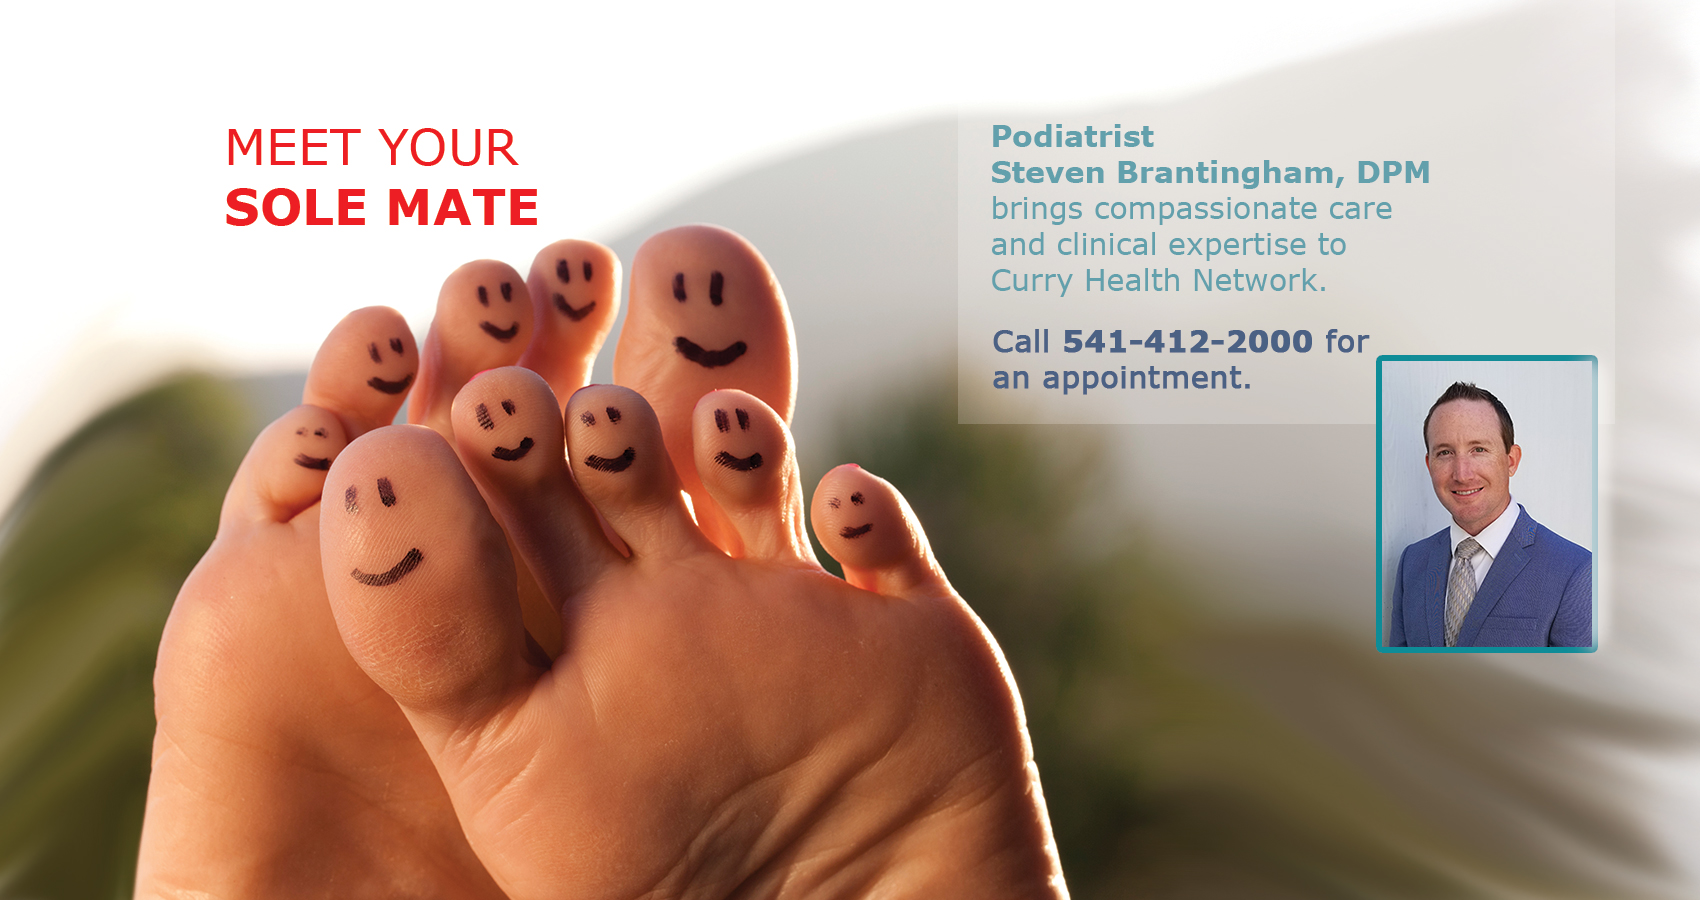 Banner picture of toes with smily faces drawn on the back of each toes with a marker, and image of physician. Text: Meet your "Sole" Mate. Podiatrist Steven Brantingham, DPM brings compassionate care and clinical expertise to Curry Health Network.